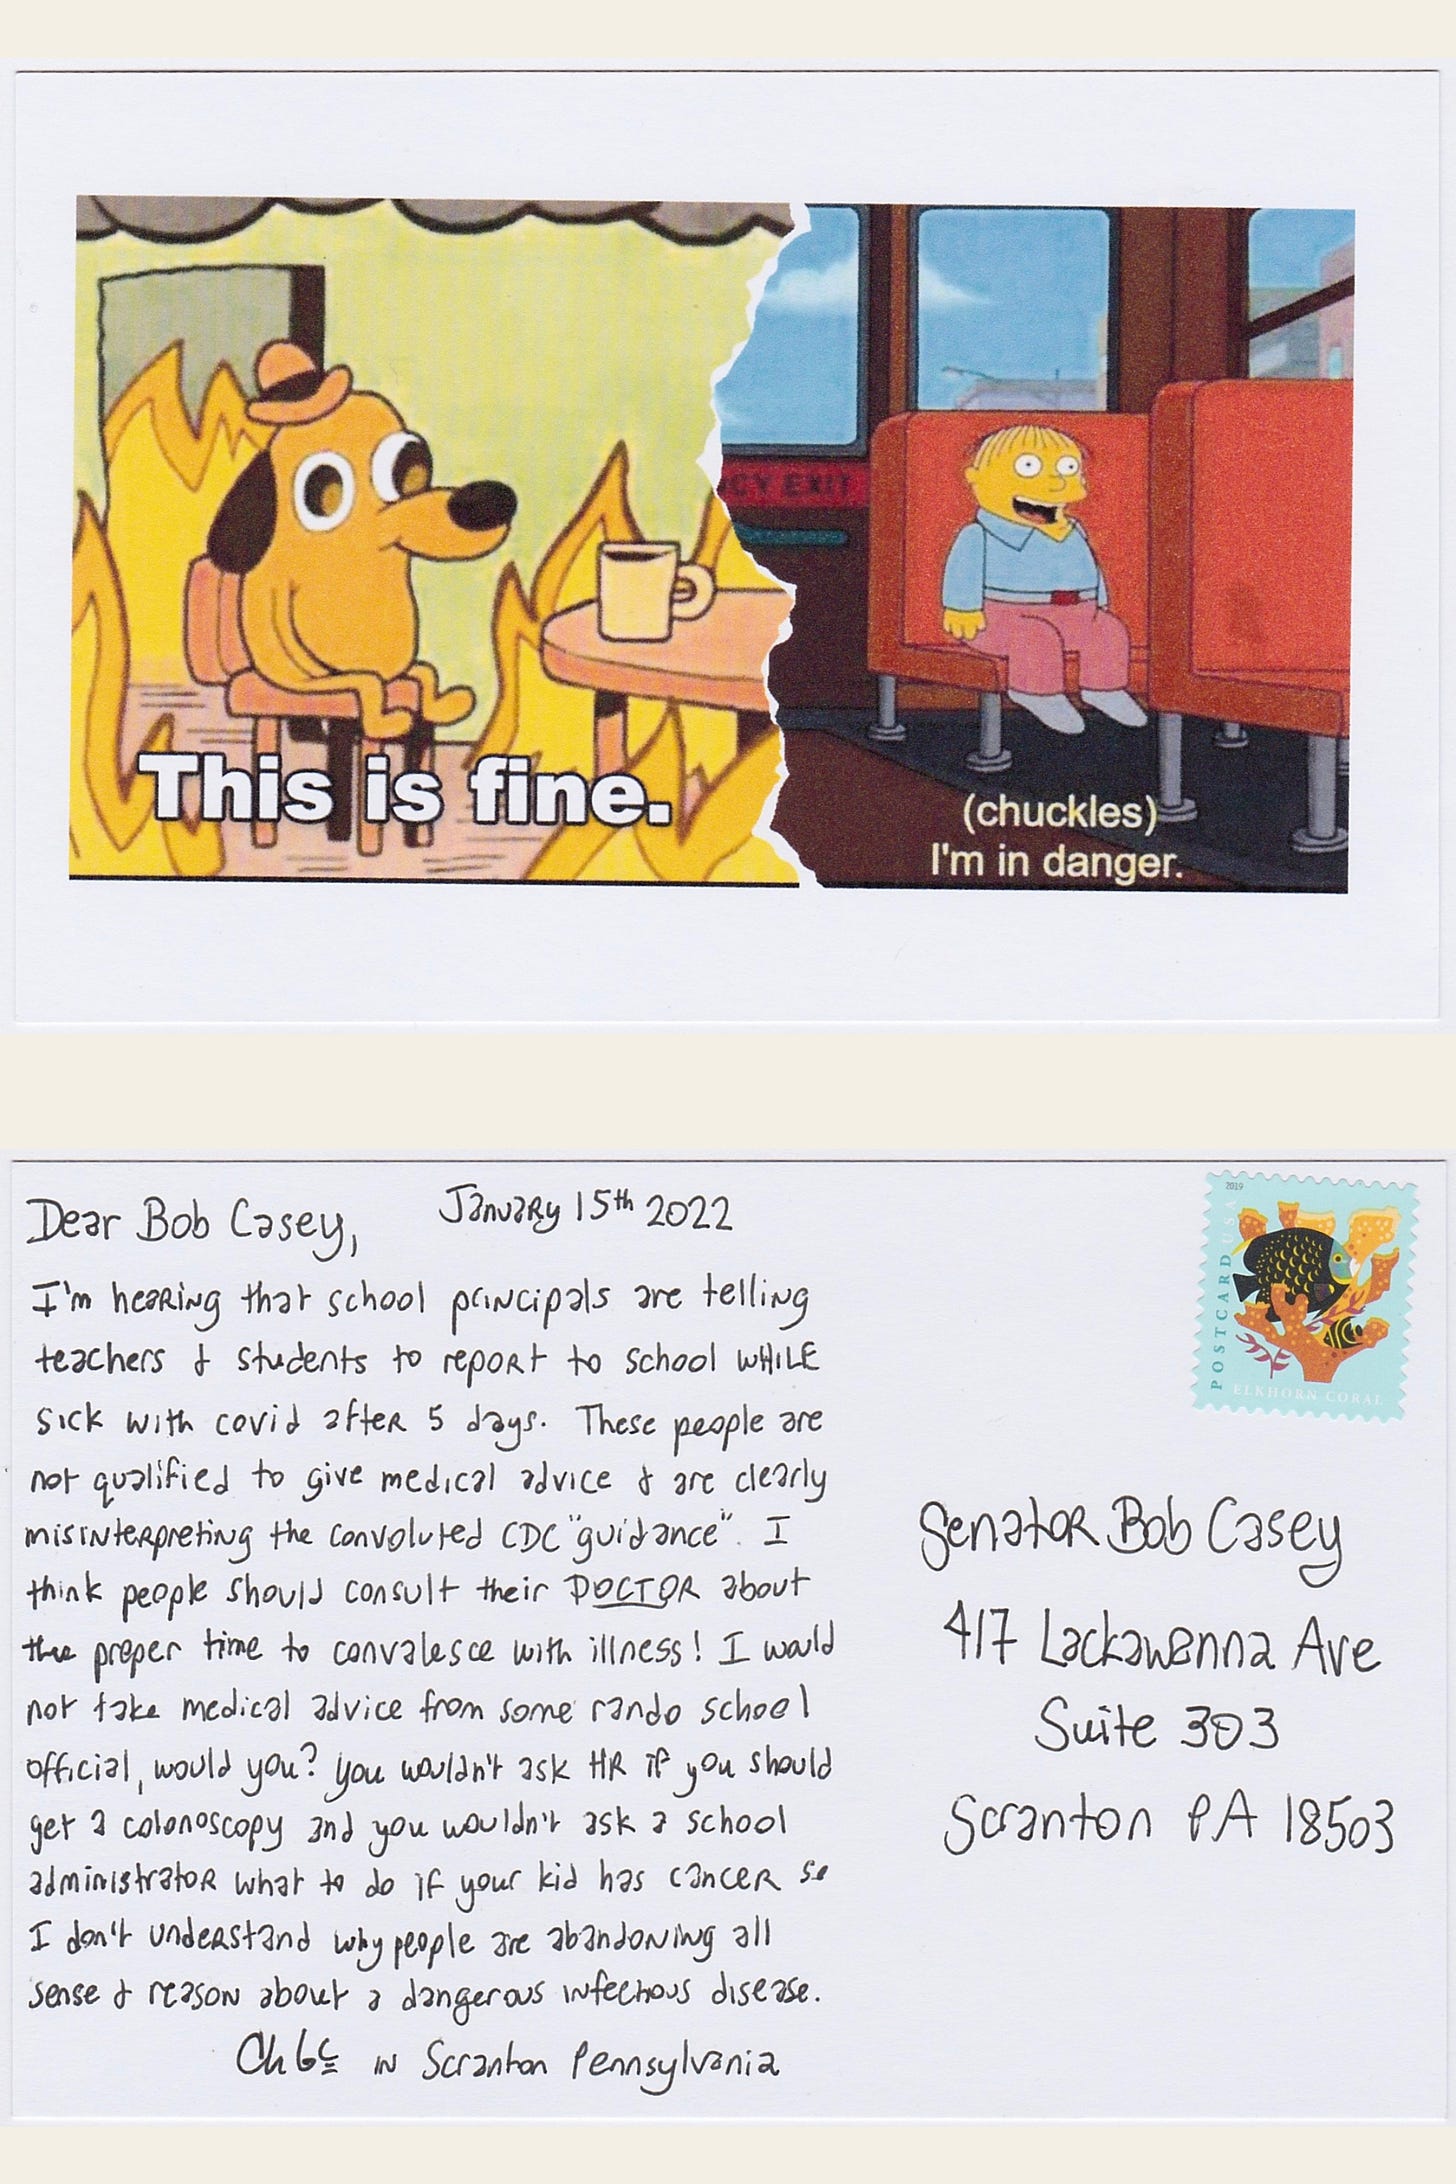 Postcard made with a meme that is Split of 2 memes, the This is fine dog in the burning room and also the kid from the Simpsons sitting on the bus alone with caption Chuckles I'm in danger. The postcard has a postcard stamp with a fish and is addressed to Senator Bob Casey in Scranton Pennsylvania and reads January 15th 2022 Dear Bob Casey I’m hearing that school principals are telling teachers & students to report to school while sick with covid after 5 days. These people are not qualified to give medical advice & are clearly misinterpreting the convoluted CDC guidance. I think People should consult their DOCTOR about the proper time to convalesce with illness! I would not take medical advice from some random school official would you? You wouldn’t ask HR if you should get a colonoscopy and you wouldn’t ask a school administrator what to do if your kid has cancer so I don’t understand why people are abandoning all sense & reason about a dangerous infectious disease. Chloe in Scranton Pennsylvania